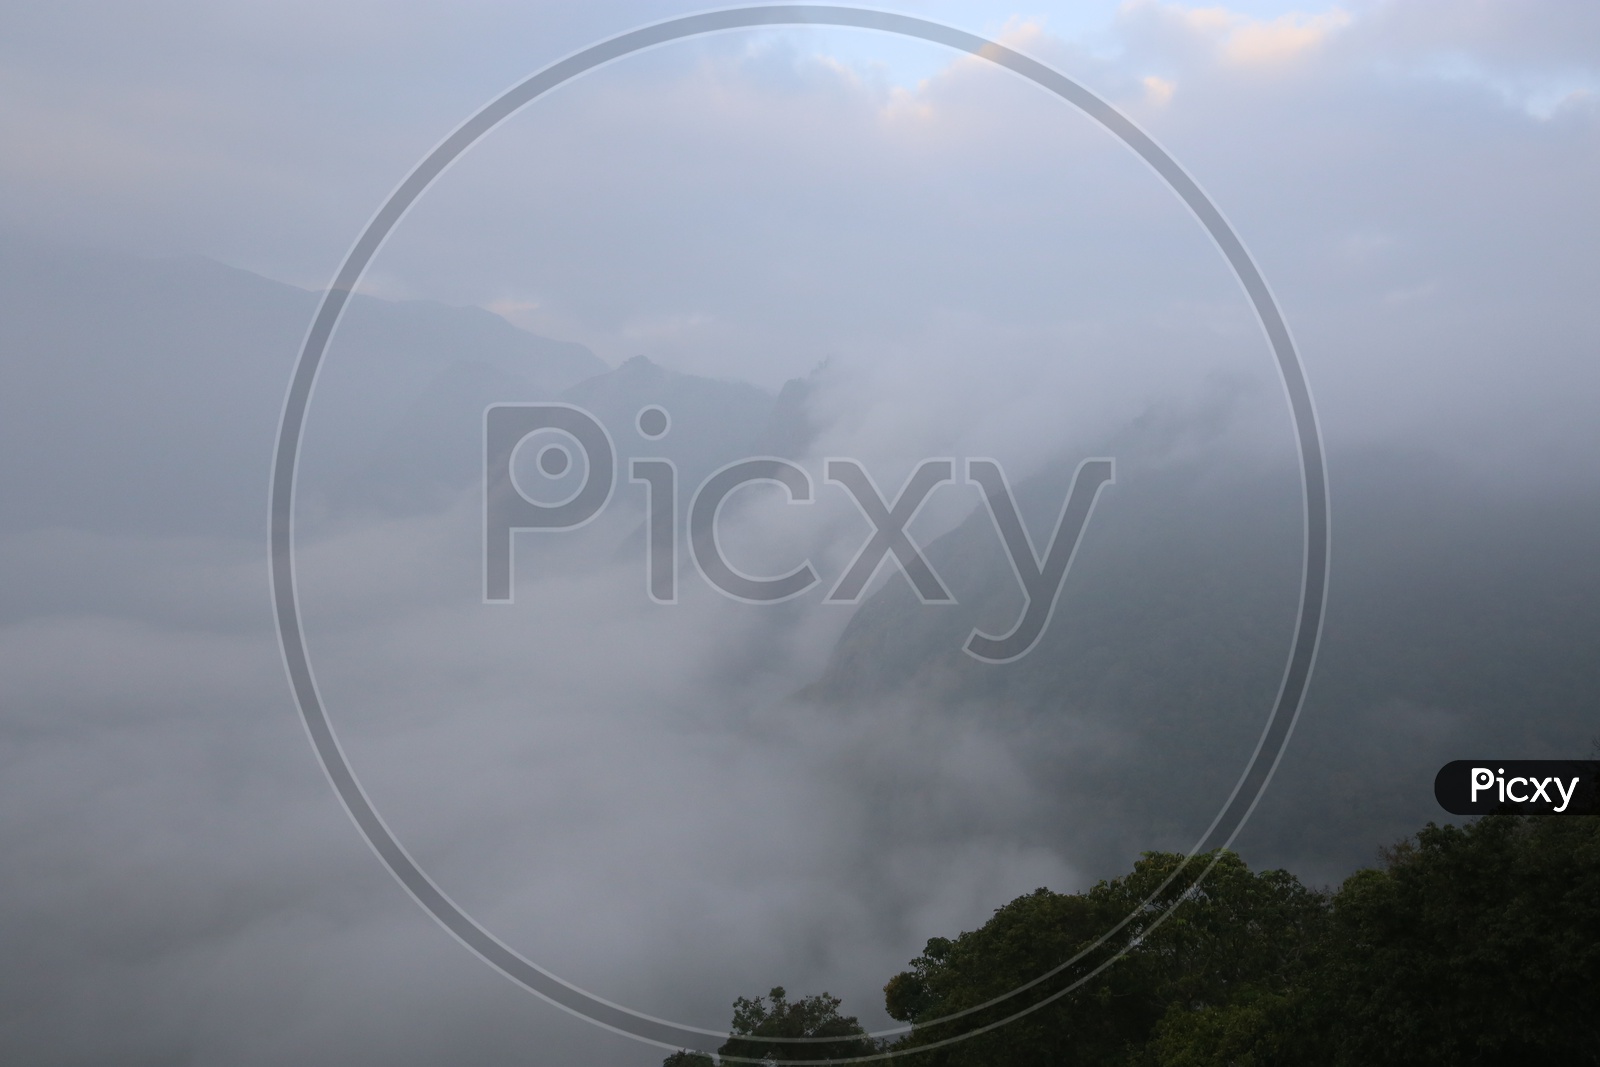 A Beautiful View Of a Landscape With Misty Fog Over The Hills in Munnar